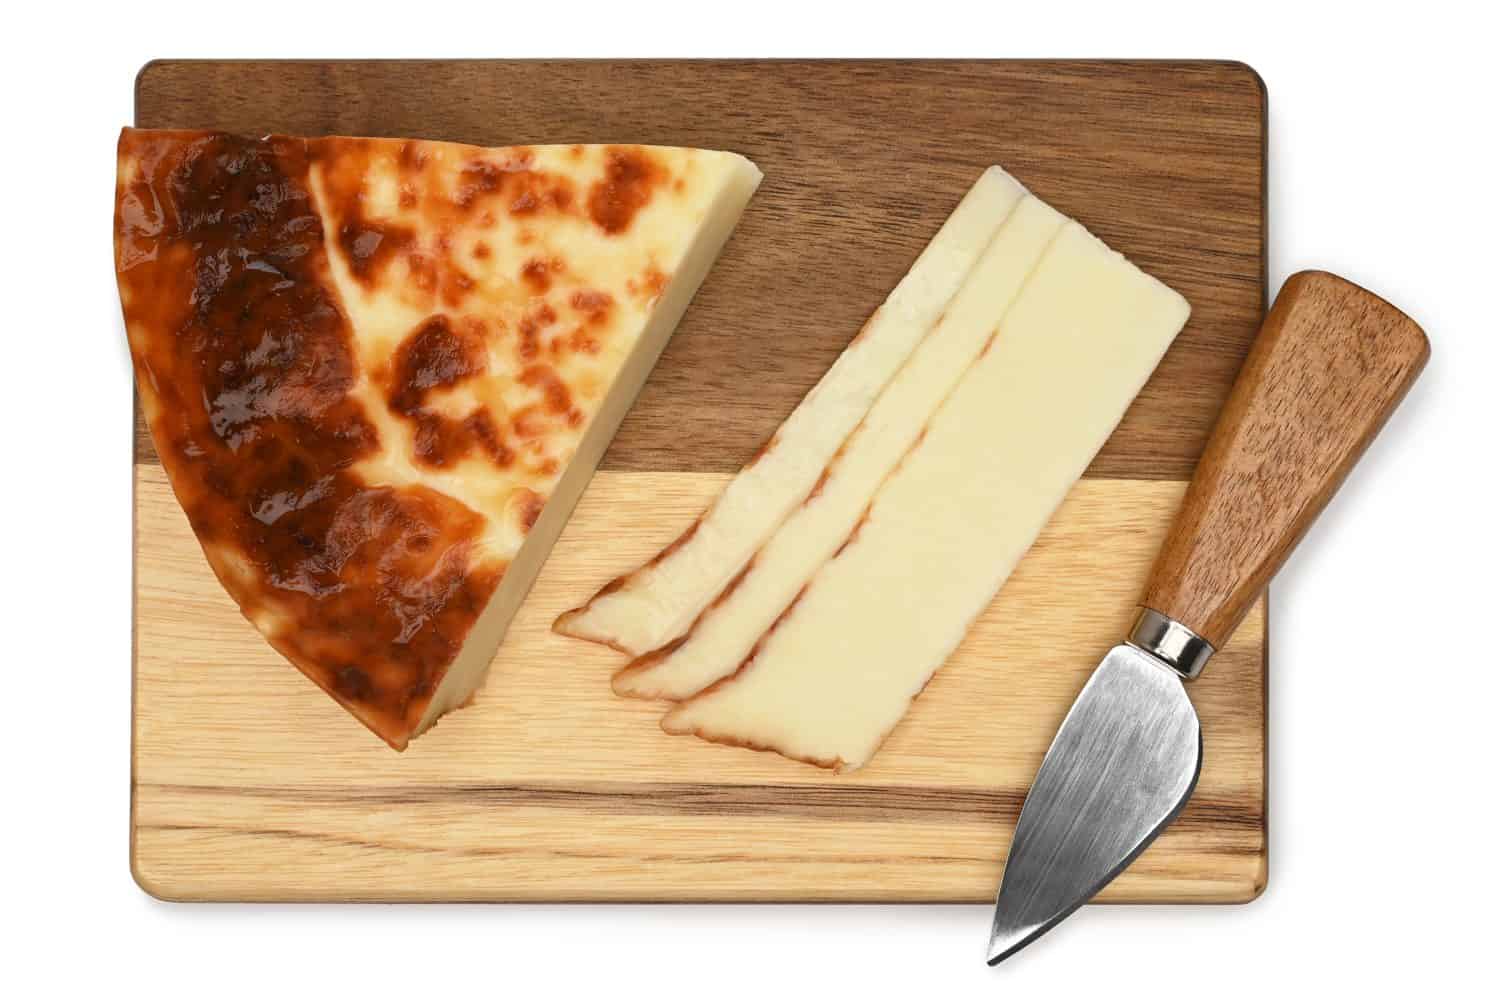 Leipajuusto, Finnish squeaky cheese (bread cheese)  with cheese knife on a wooden board on white background